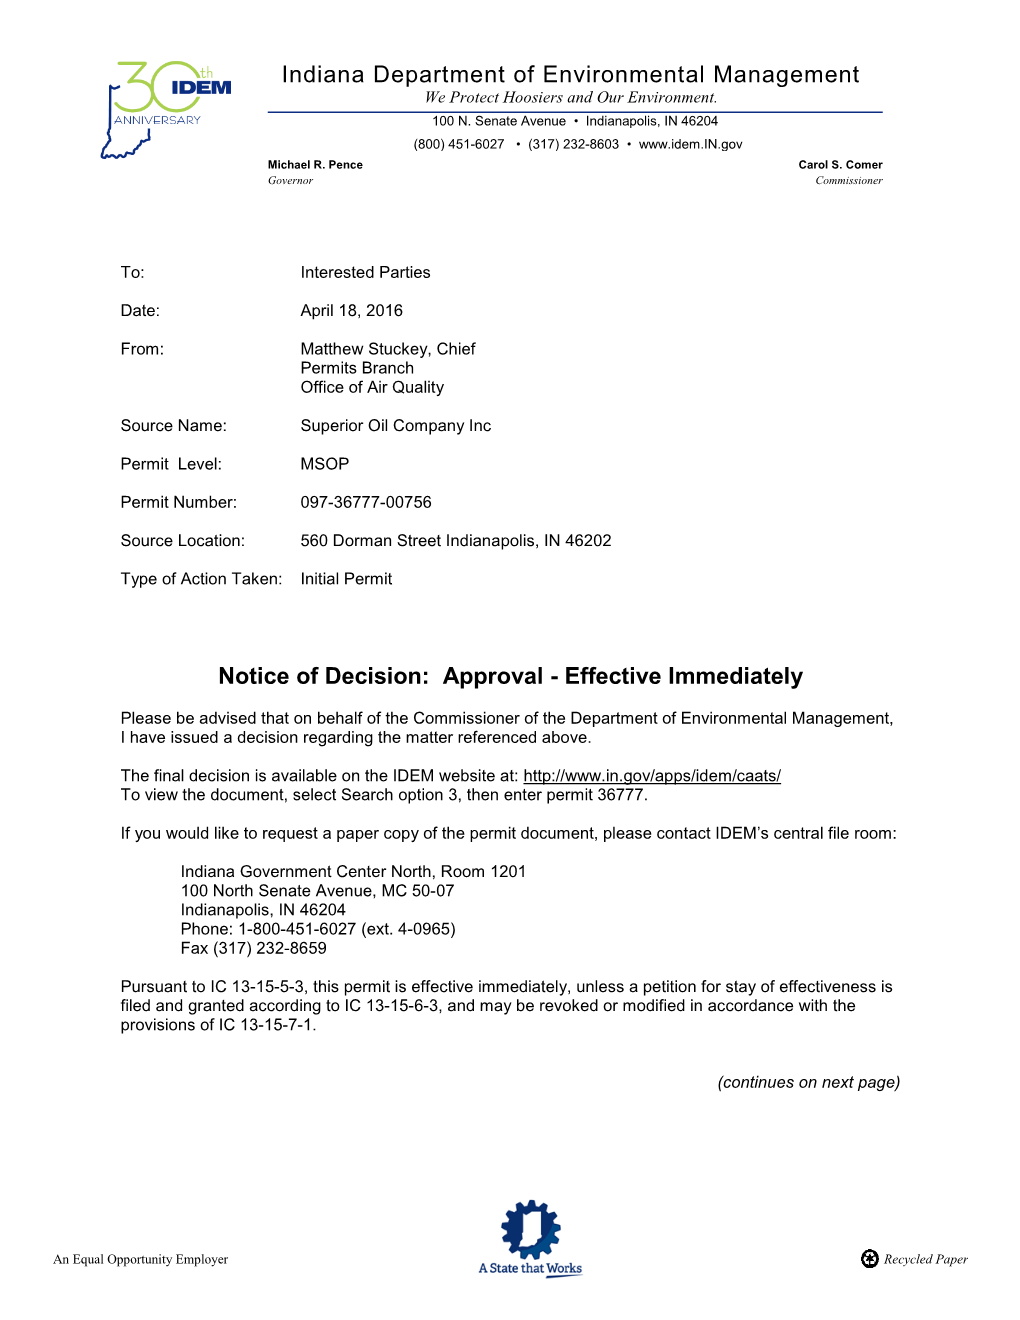 Indiana Department of Environmental Management Notice of Decision